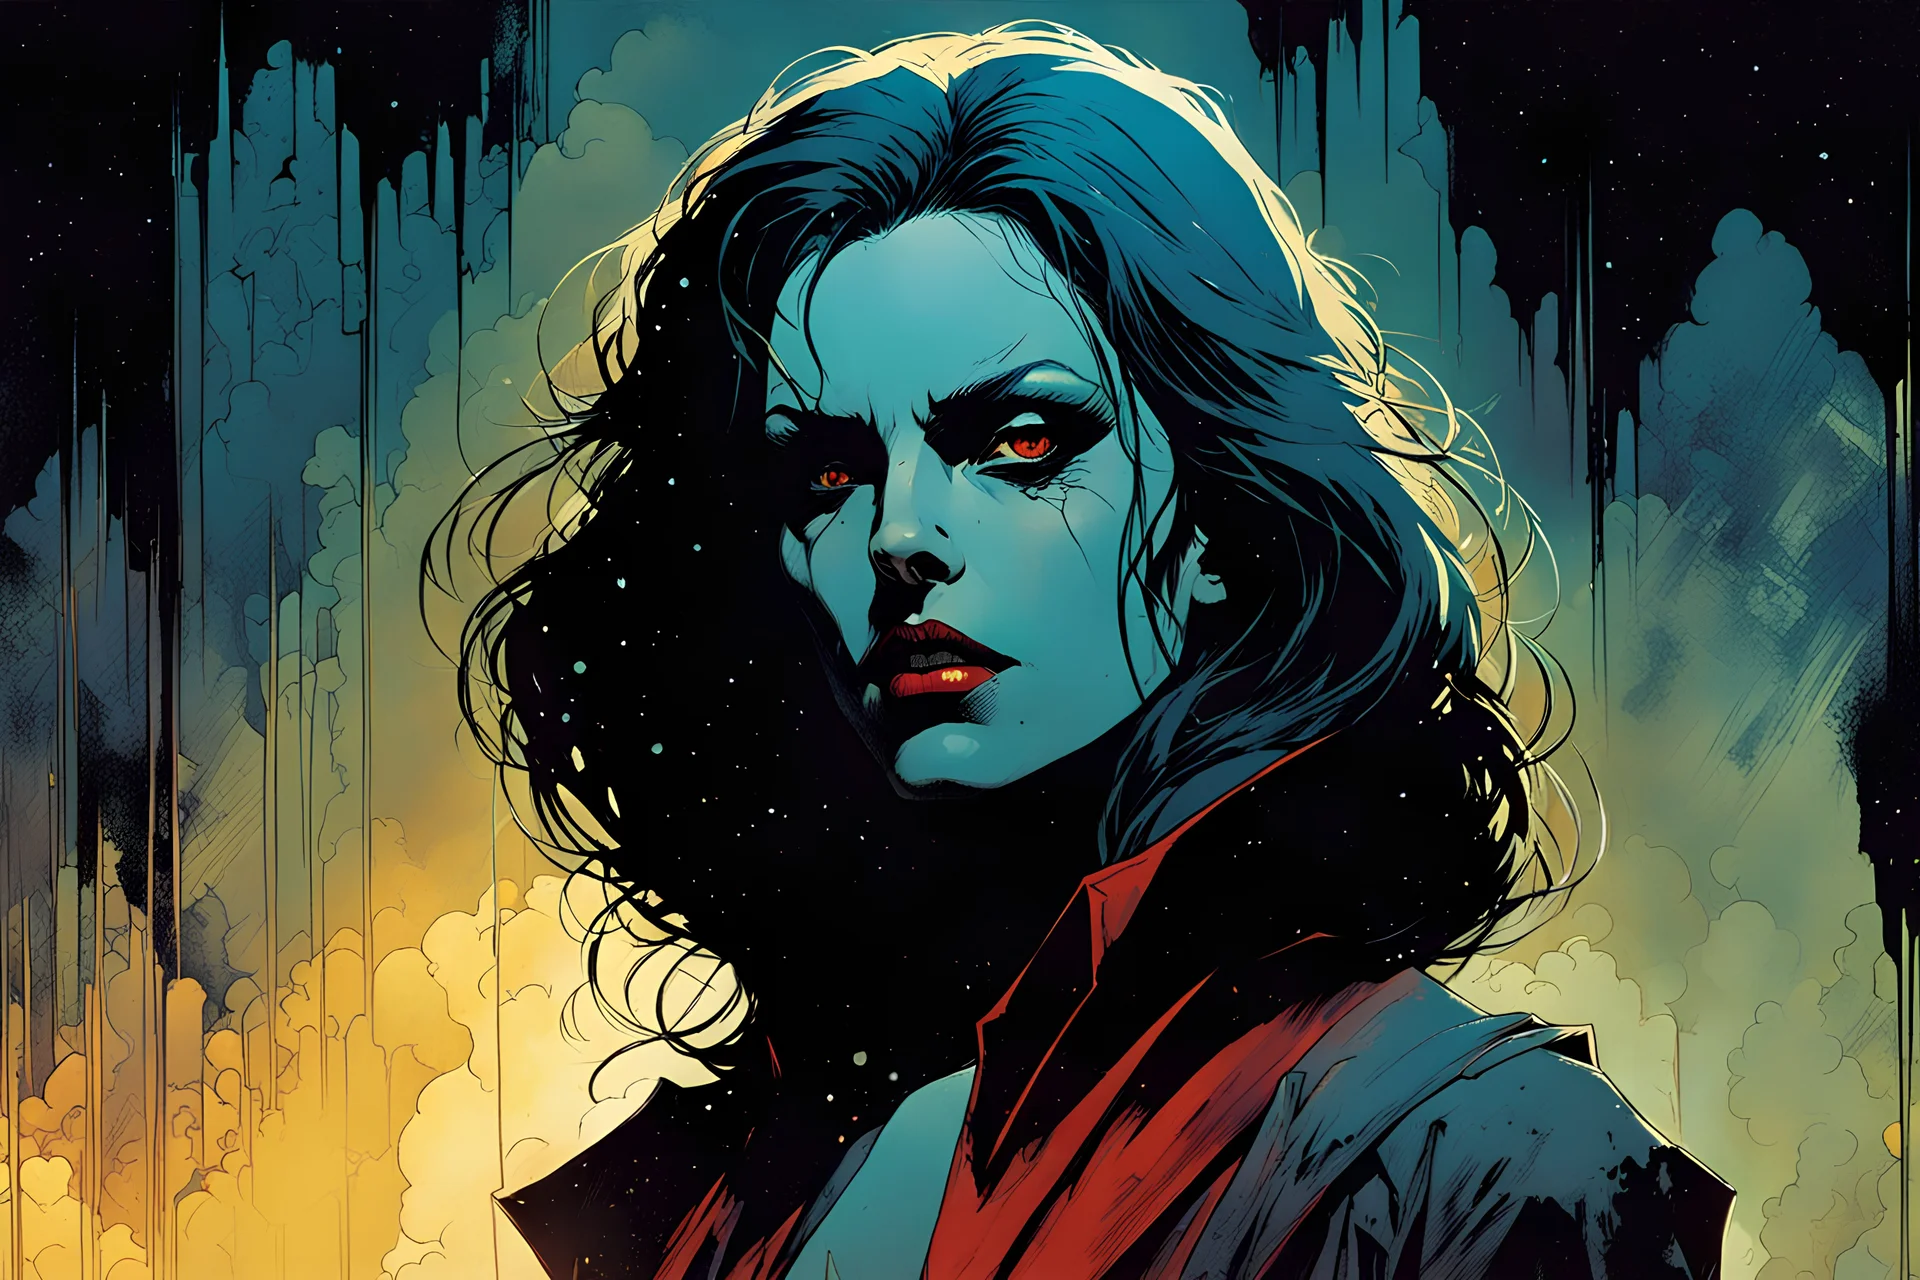 create a hardened, vampire girl in the comic book art style of Mike Mignola, Bill Sienkiewicz and Jean Giraud Moebius, , highly detailed,, grainy, gritty textures, , dramatic natural lighting